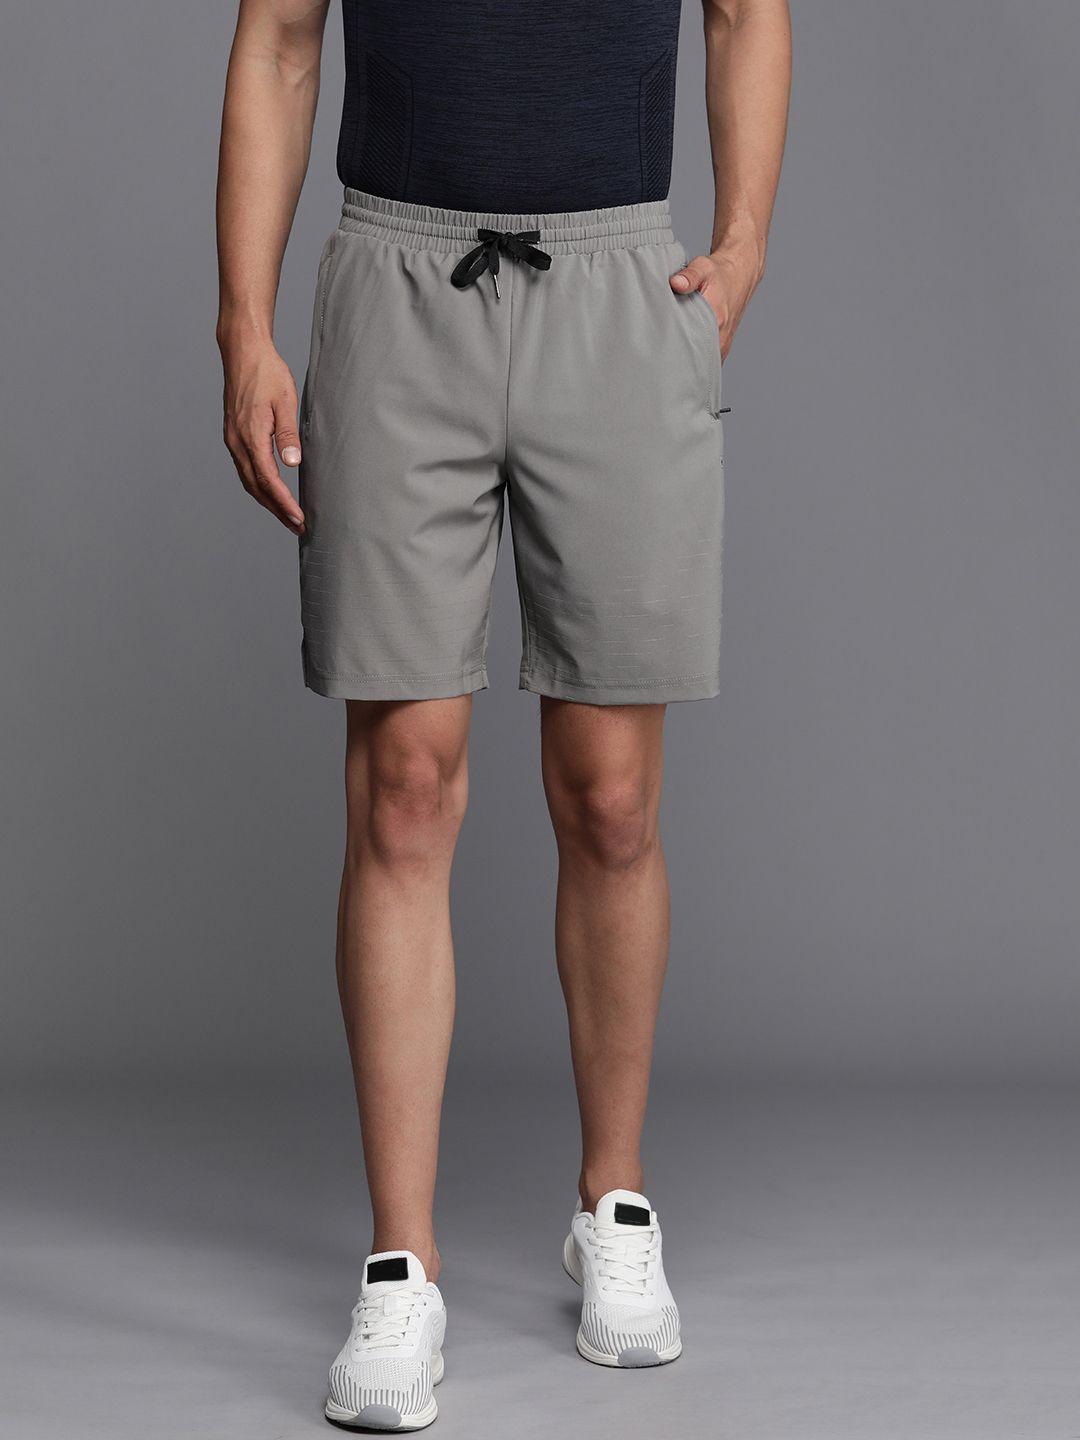 louis-philippe-athplay-men-striped-slim-fit-training-shorts